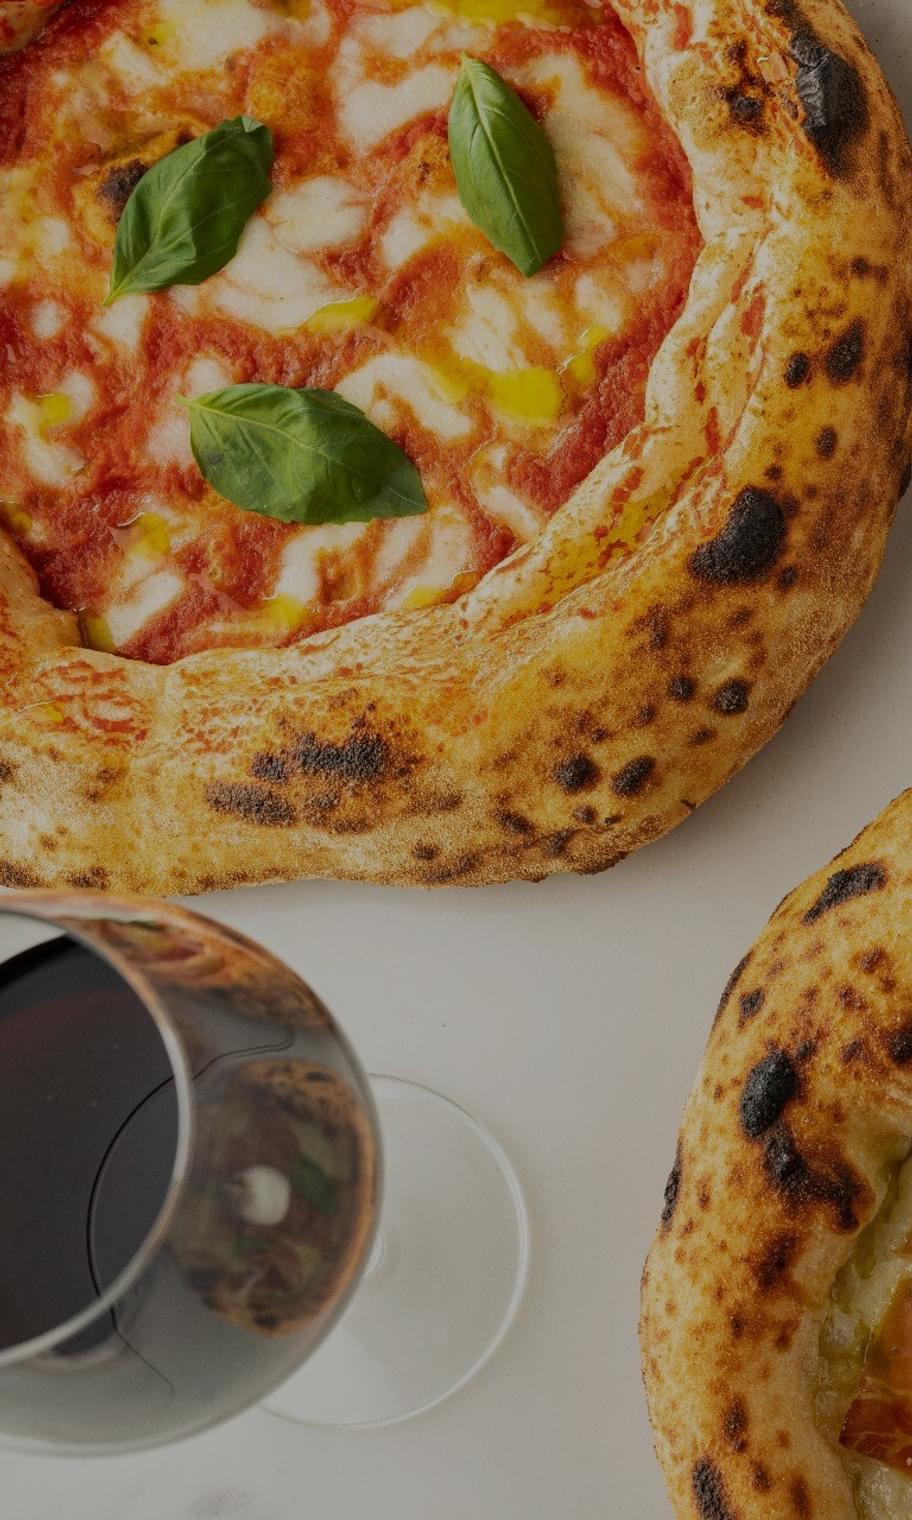 Two pizzas on a table next to a glass of wine.